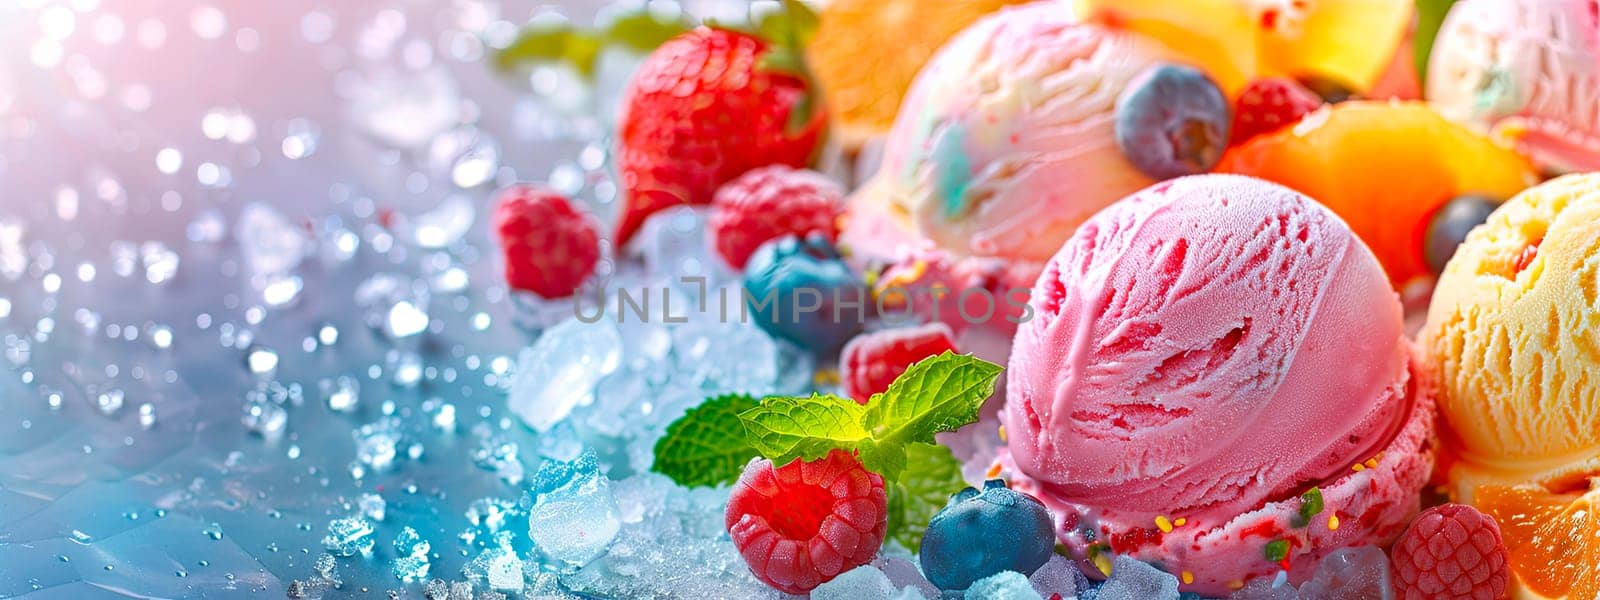 ice cream balls berries and fruits. selective focus. food.